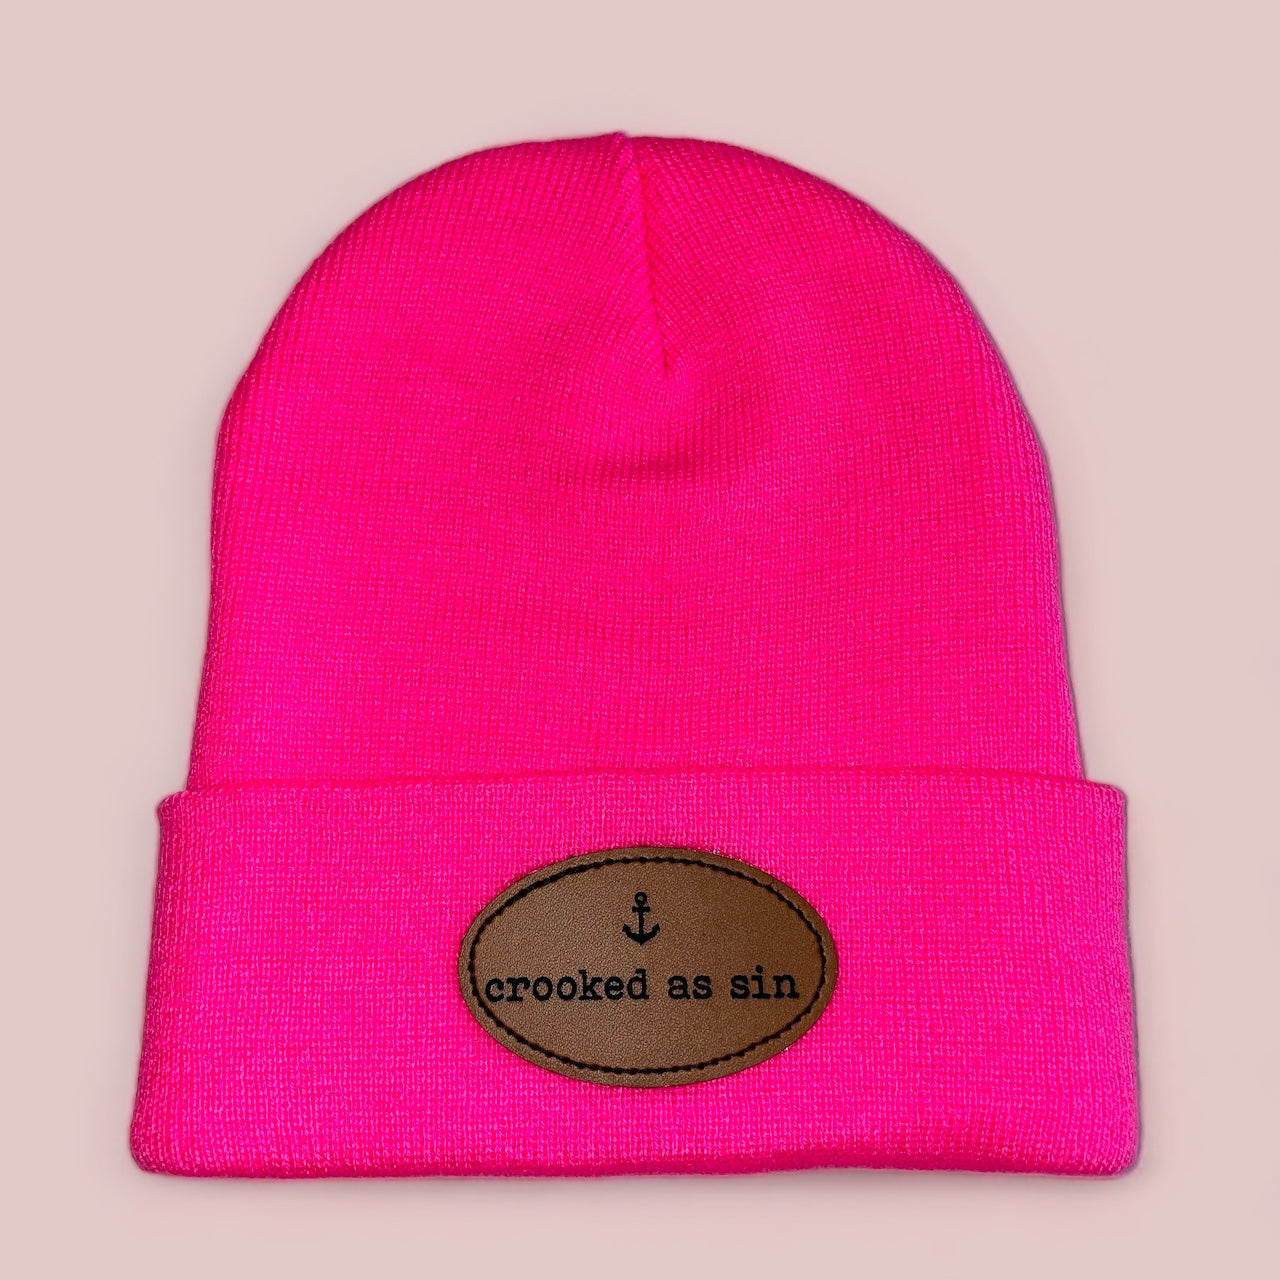 "Crooked As Sin" Beanie